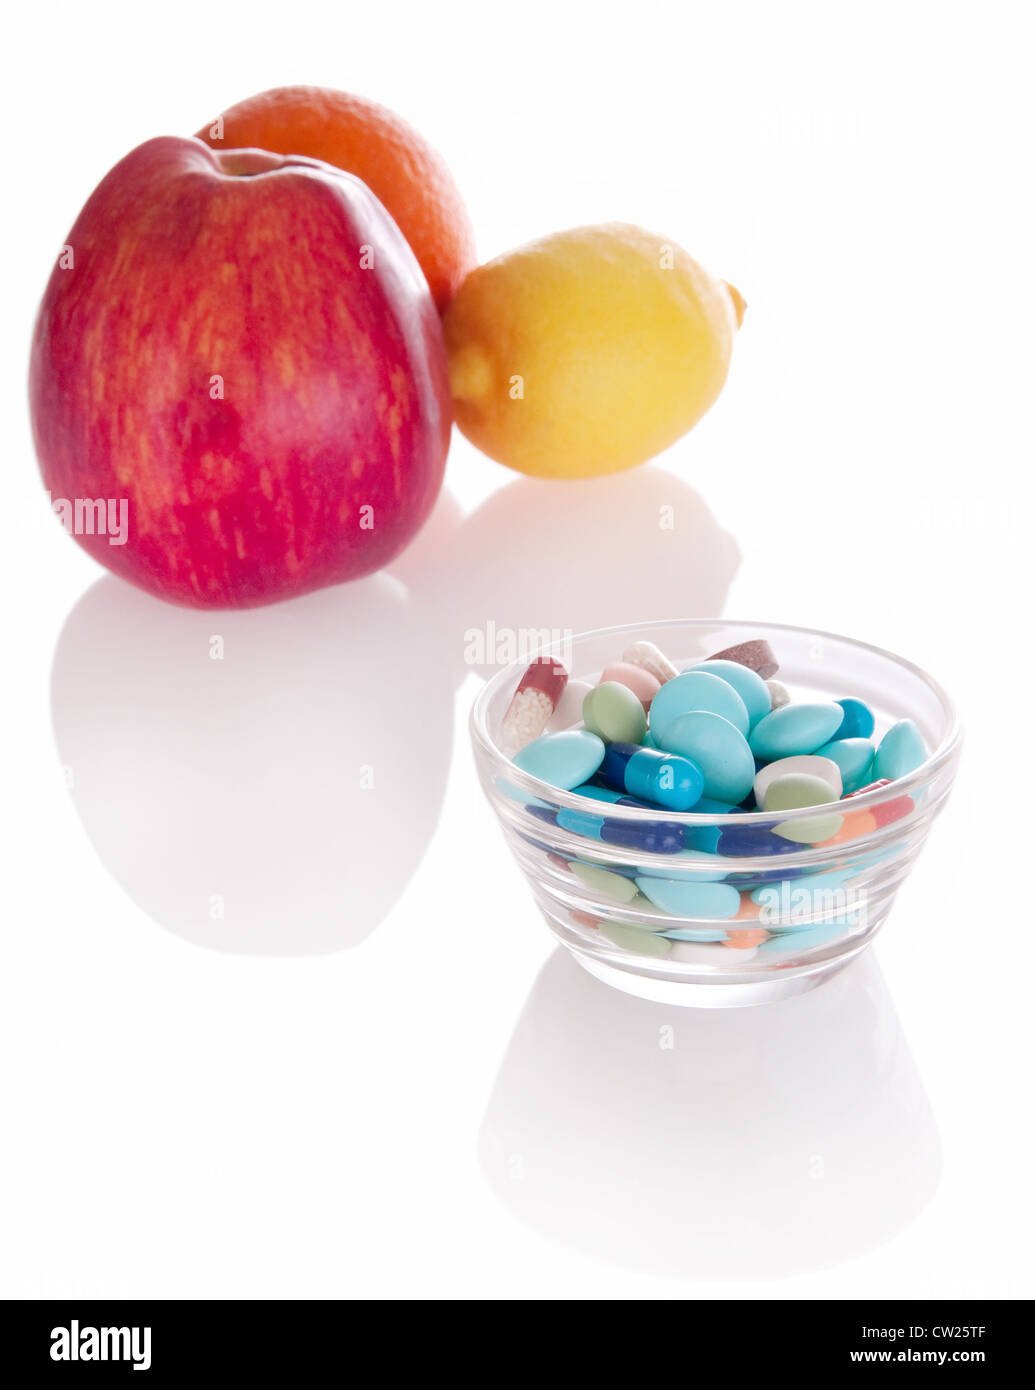 Concept of vitamin medicine with different pills in glass bowl and defocused fruits on background with soft shadows Stock Photo